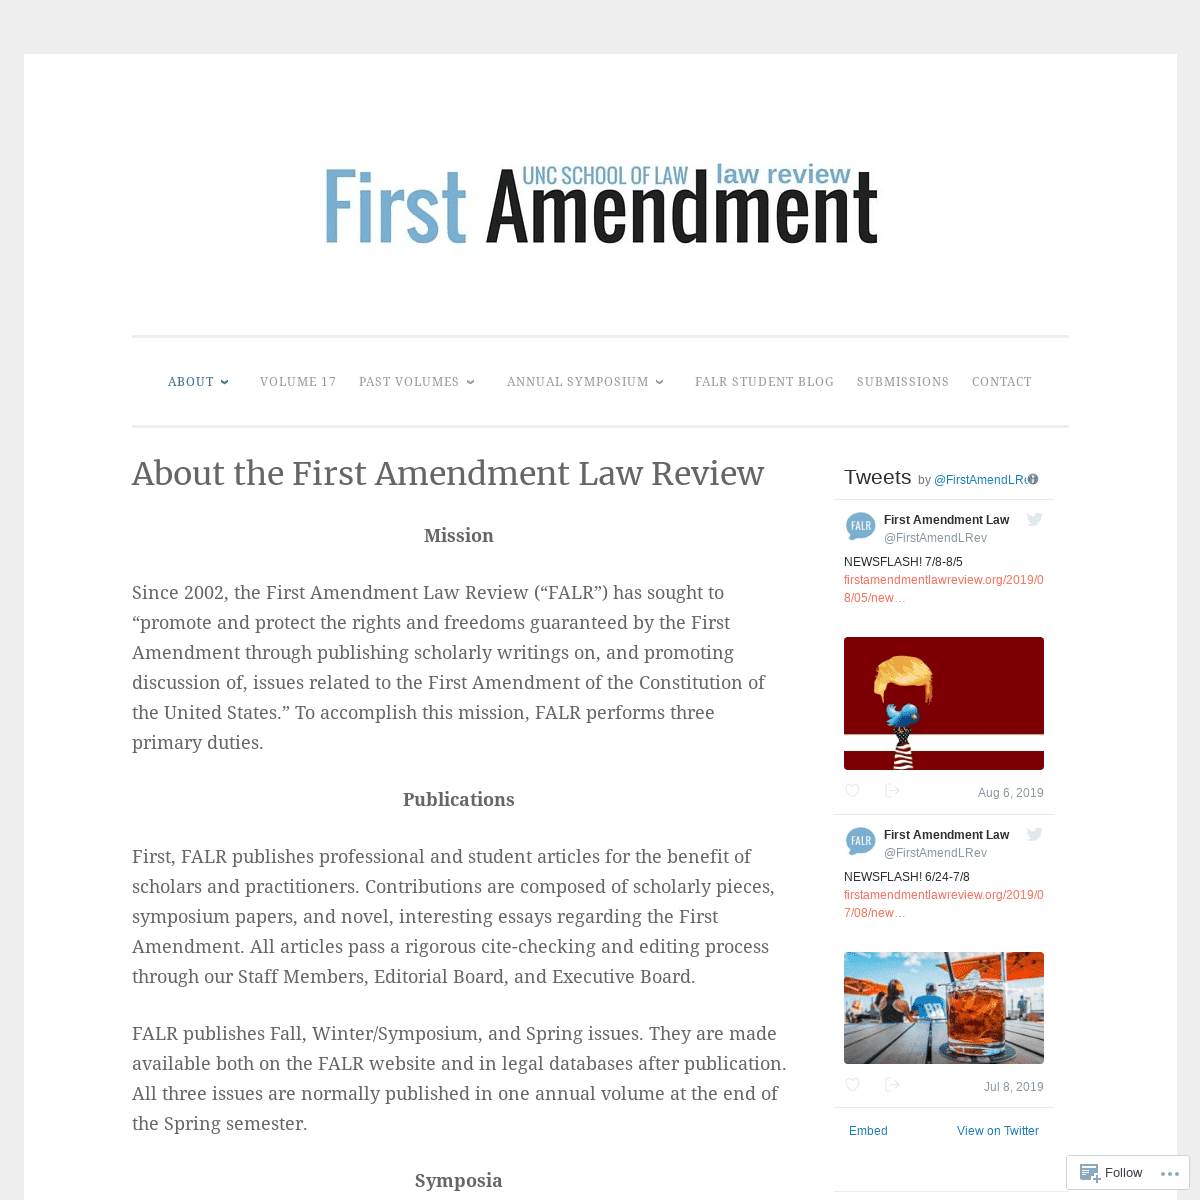 A complete backup of firstamendmentlawreview.org